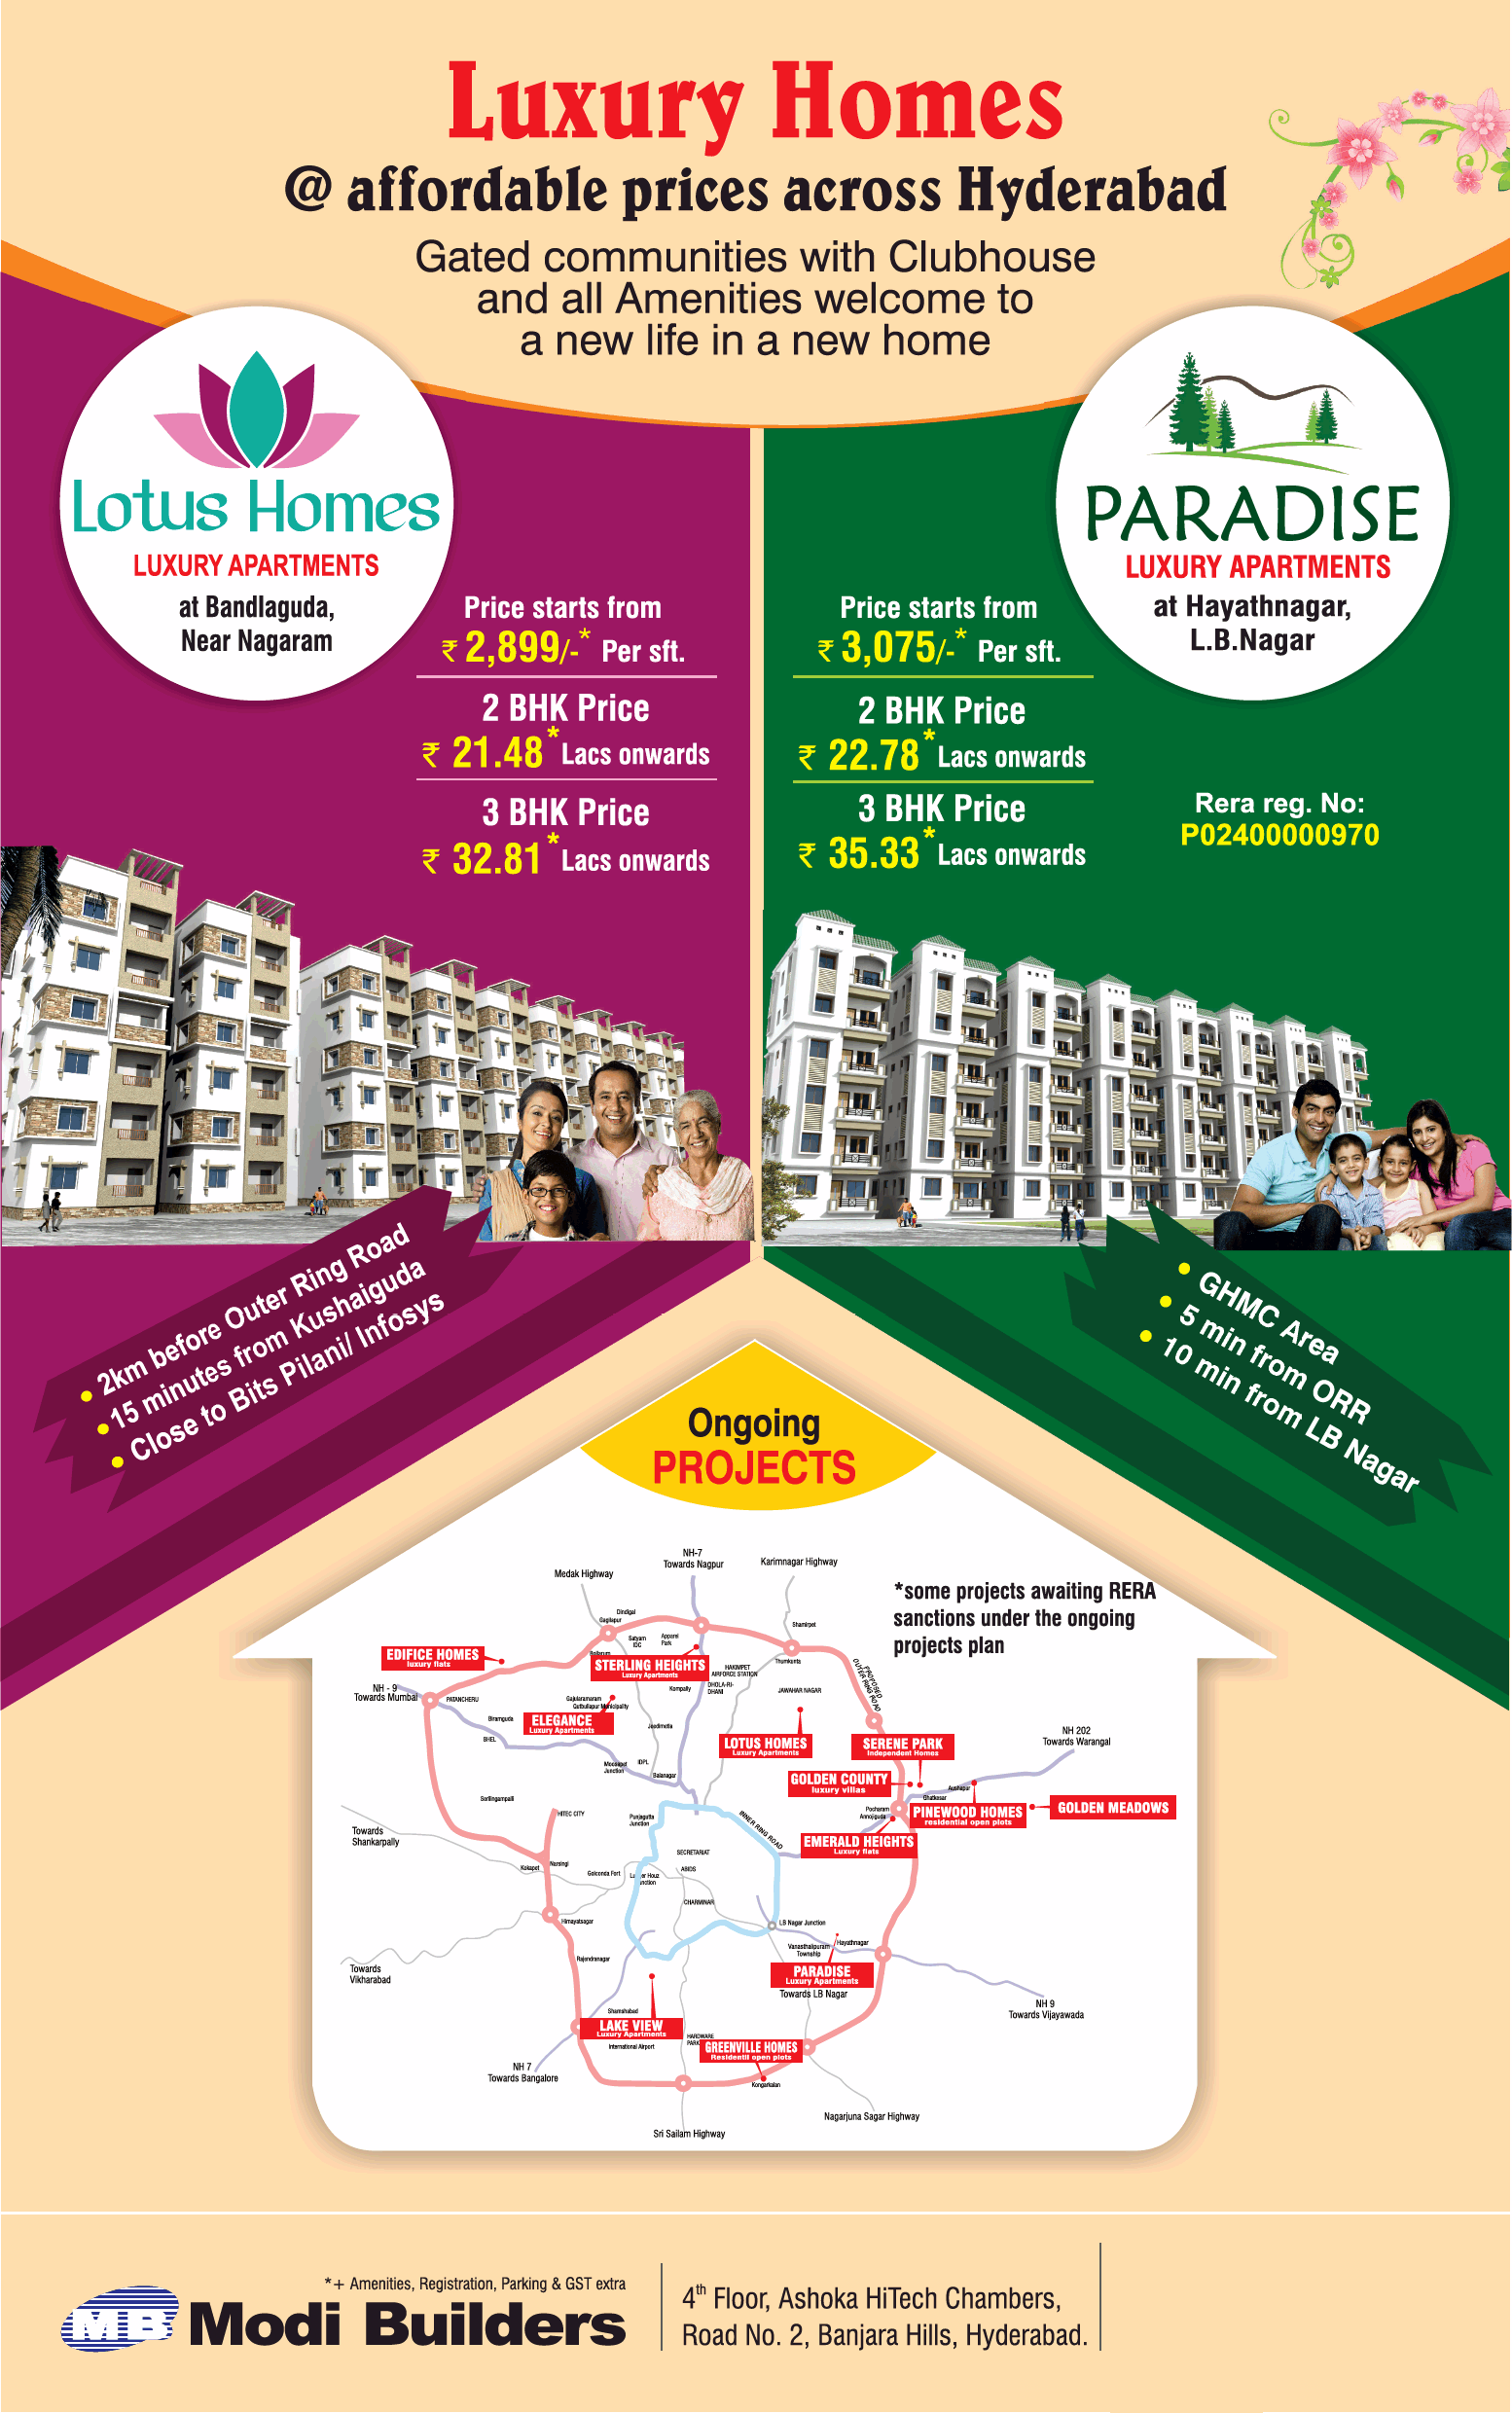 Luxury homes at affordable prices by Modi Builders, Hyderabad